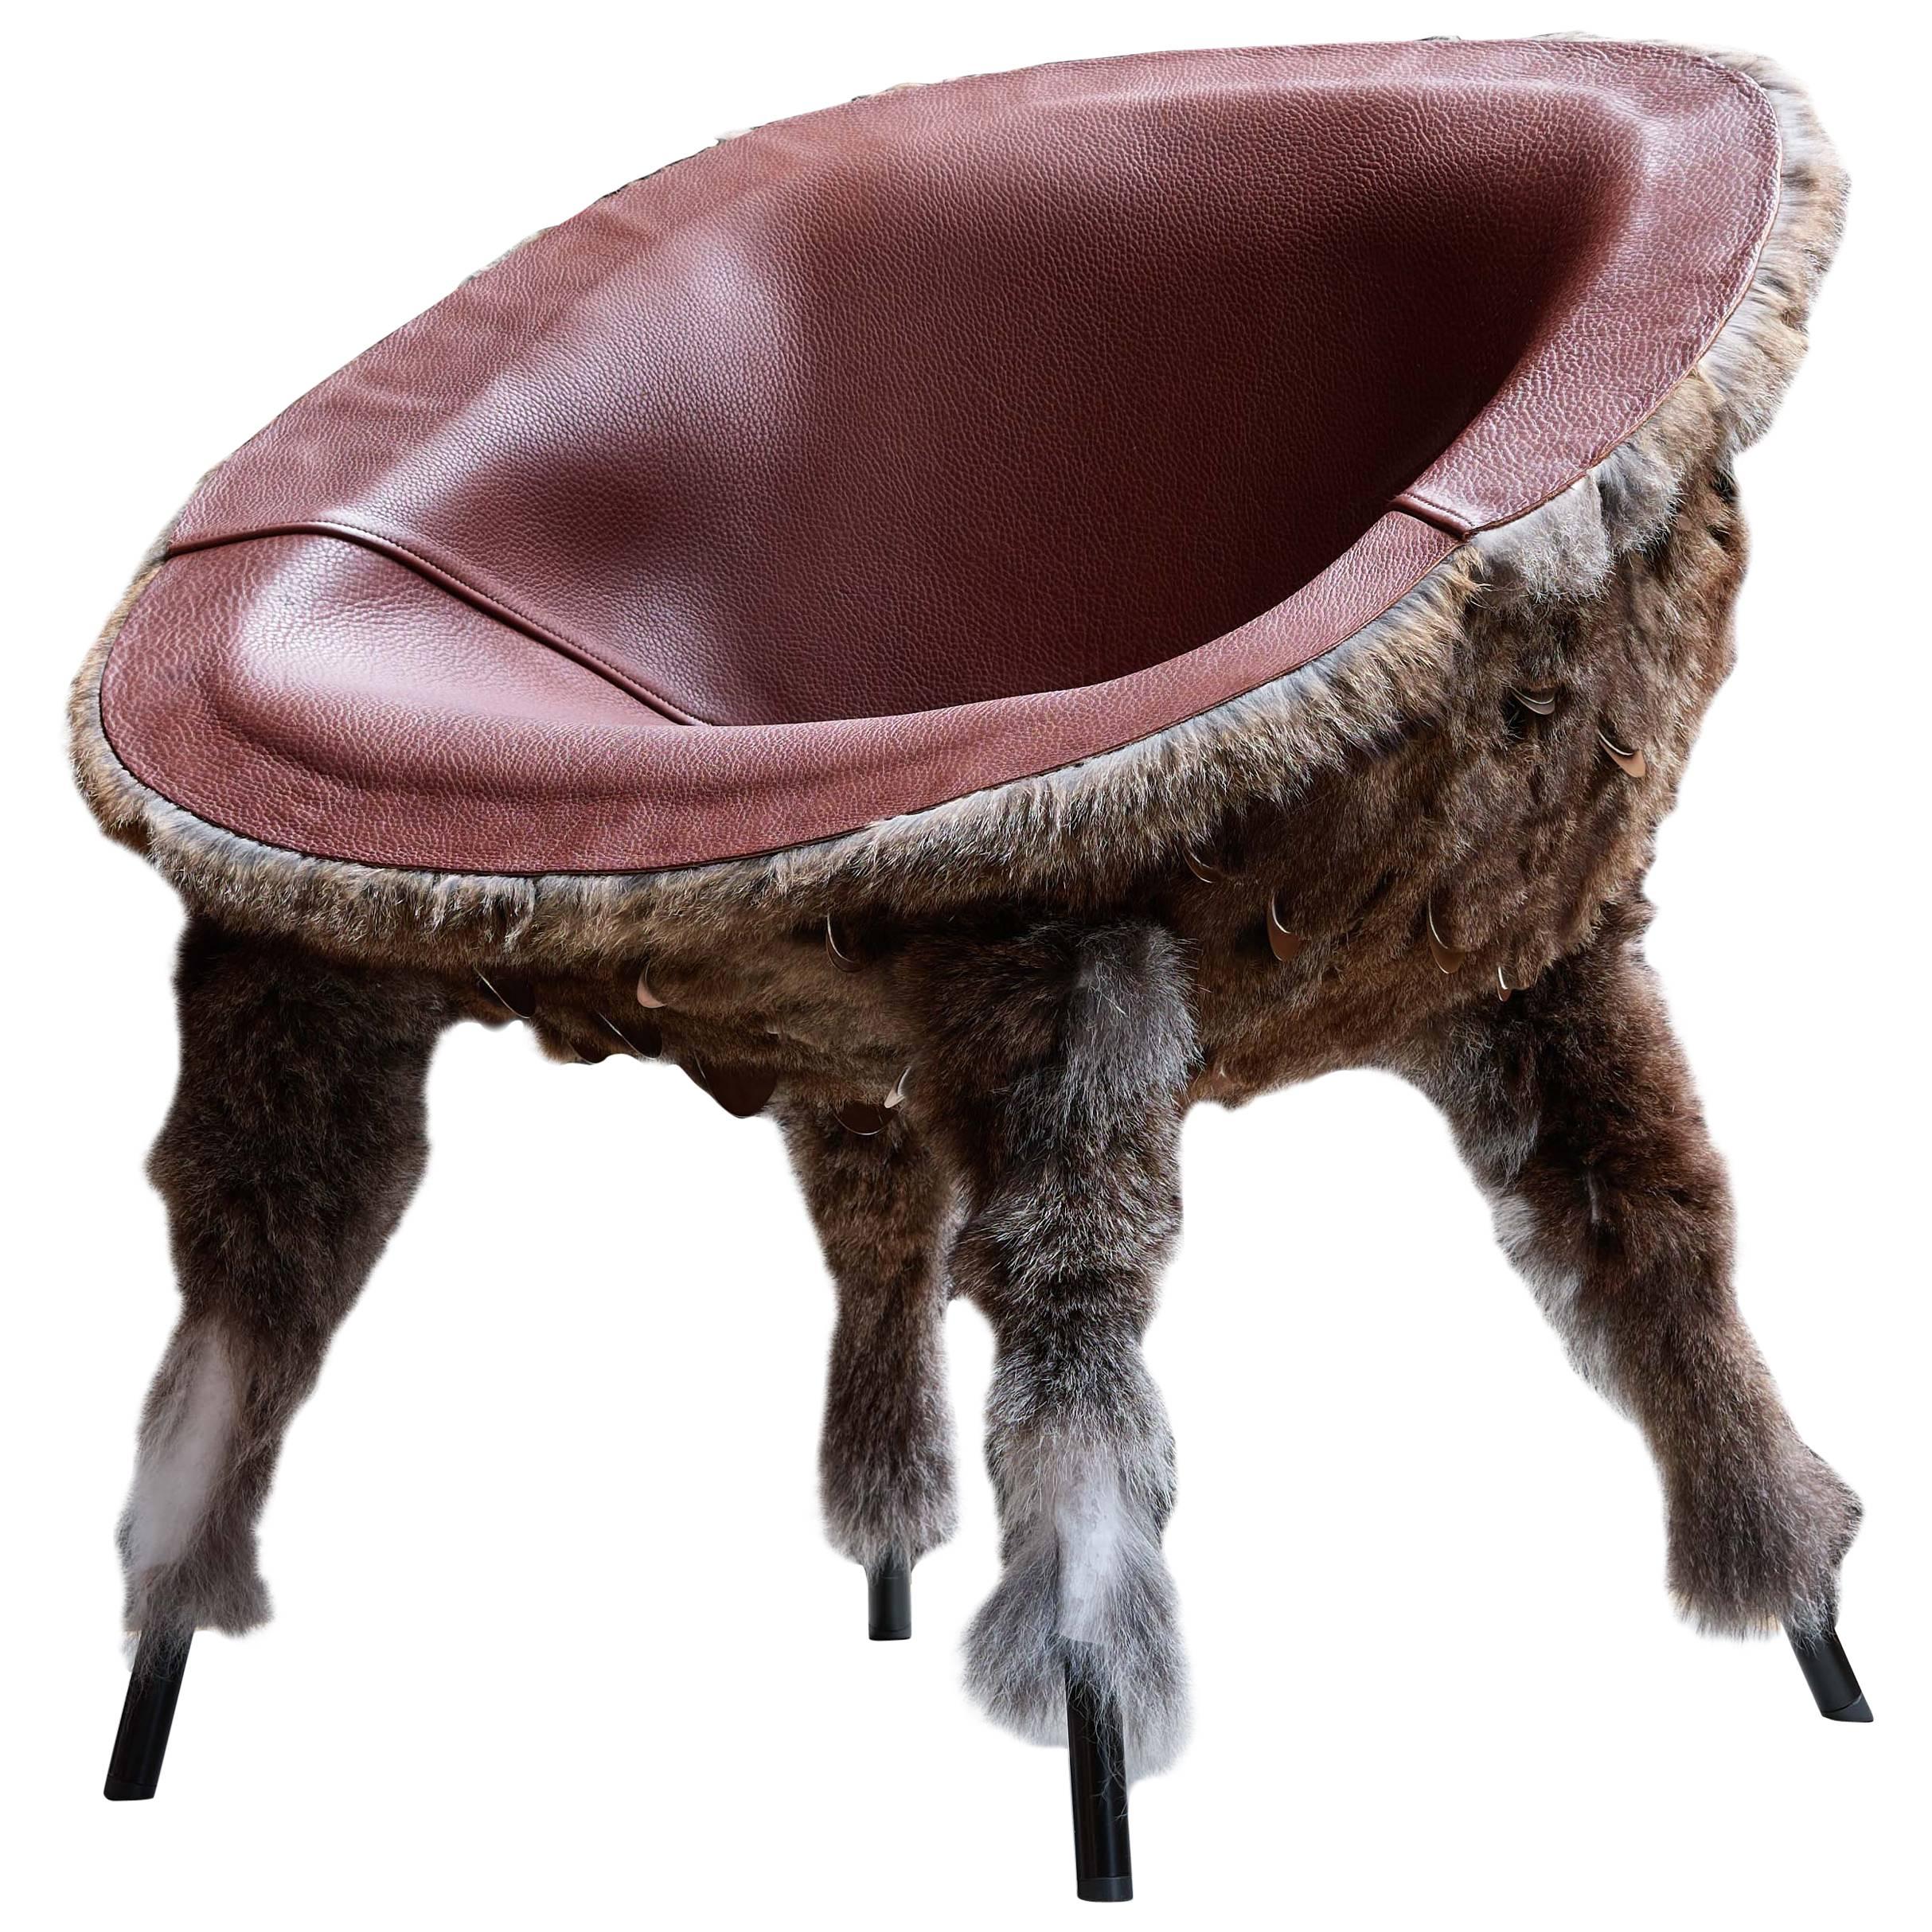 Pankalangu Armchair by Trent Jansen form the Broached Monster Collection For Sale